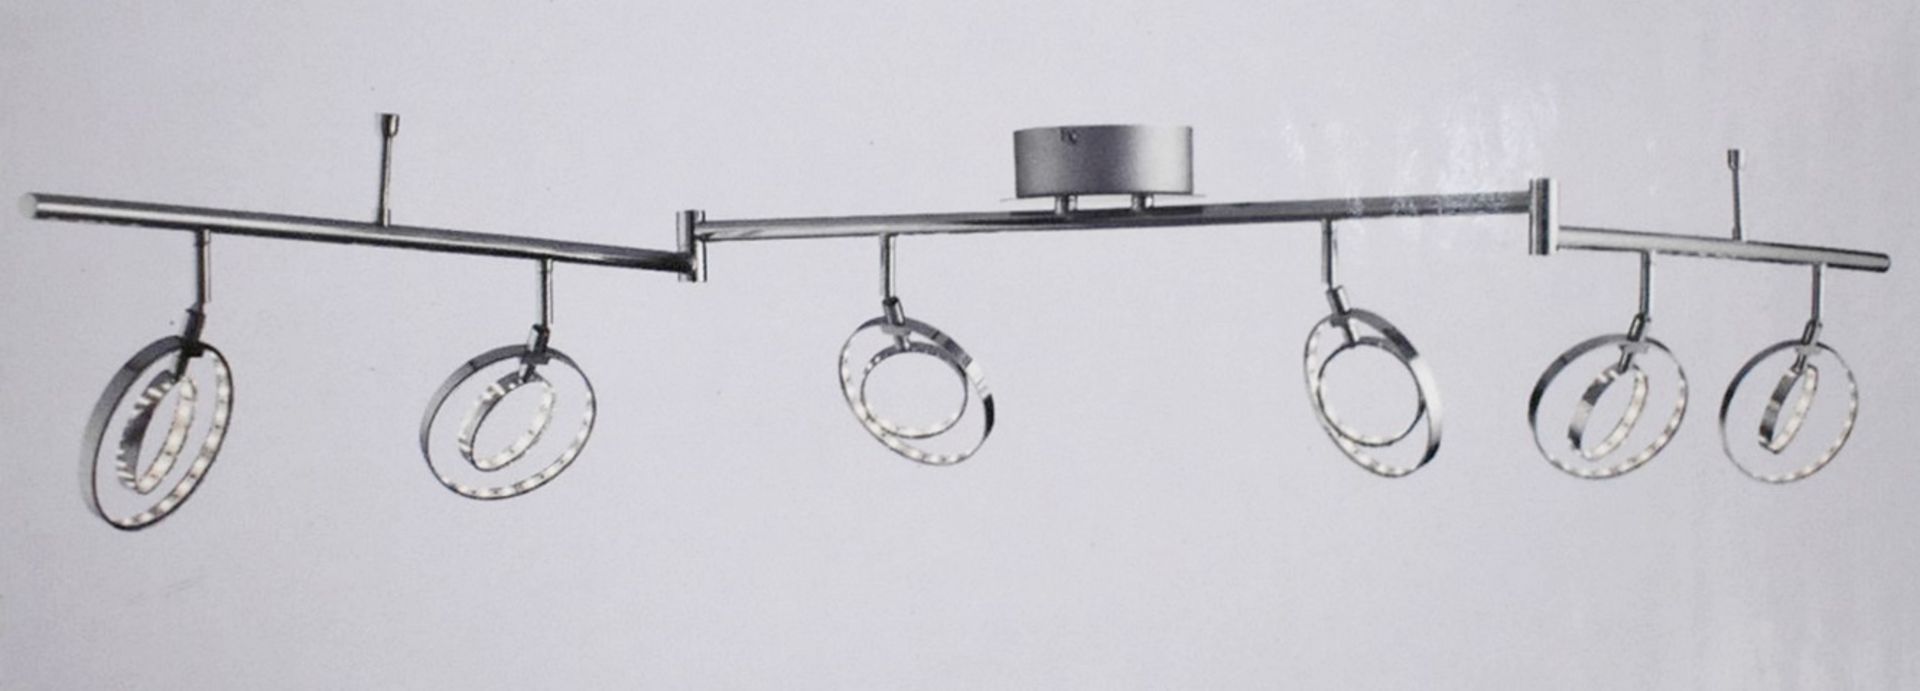 1 x Searchlight 6-Light Ceiling Spotlight Bar In Chrome With Adjustable Split Bar - New And Boxed